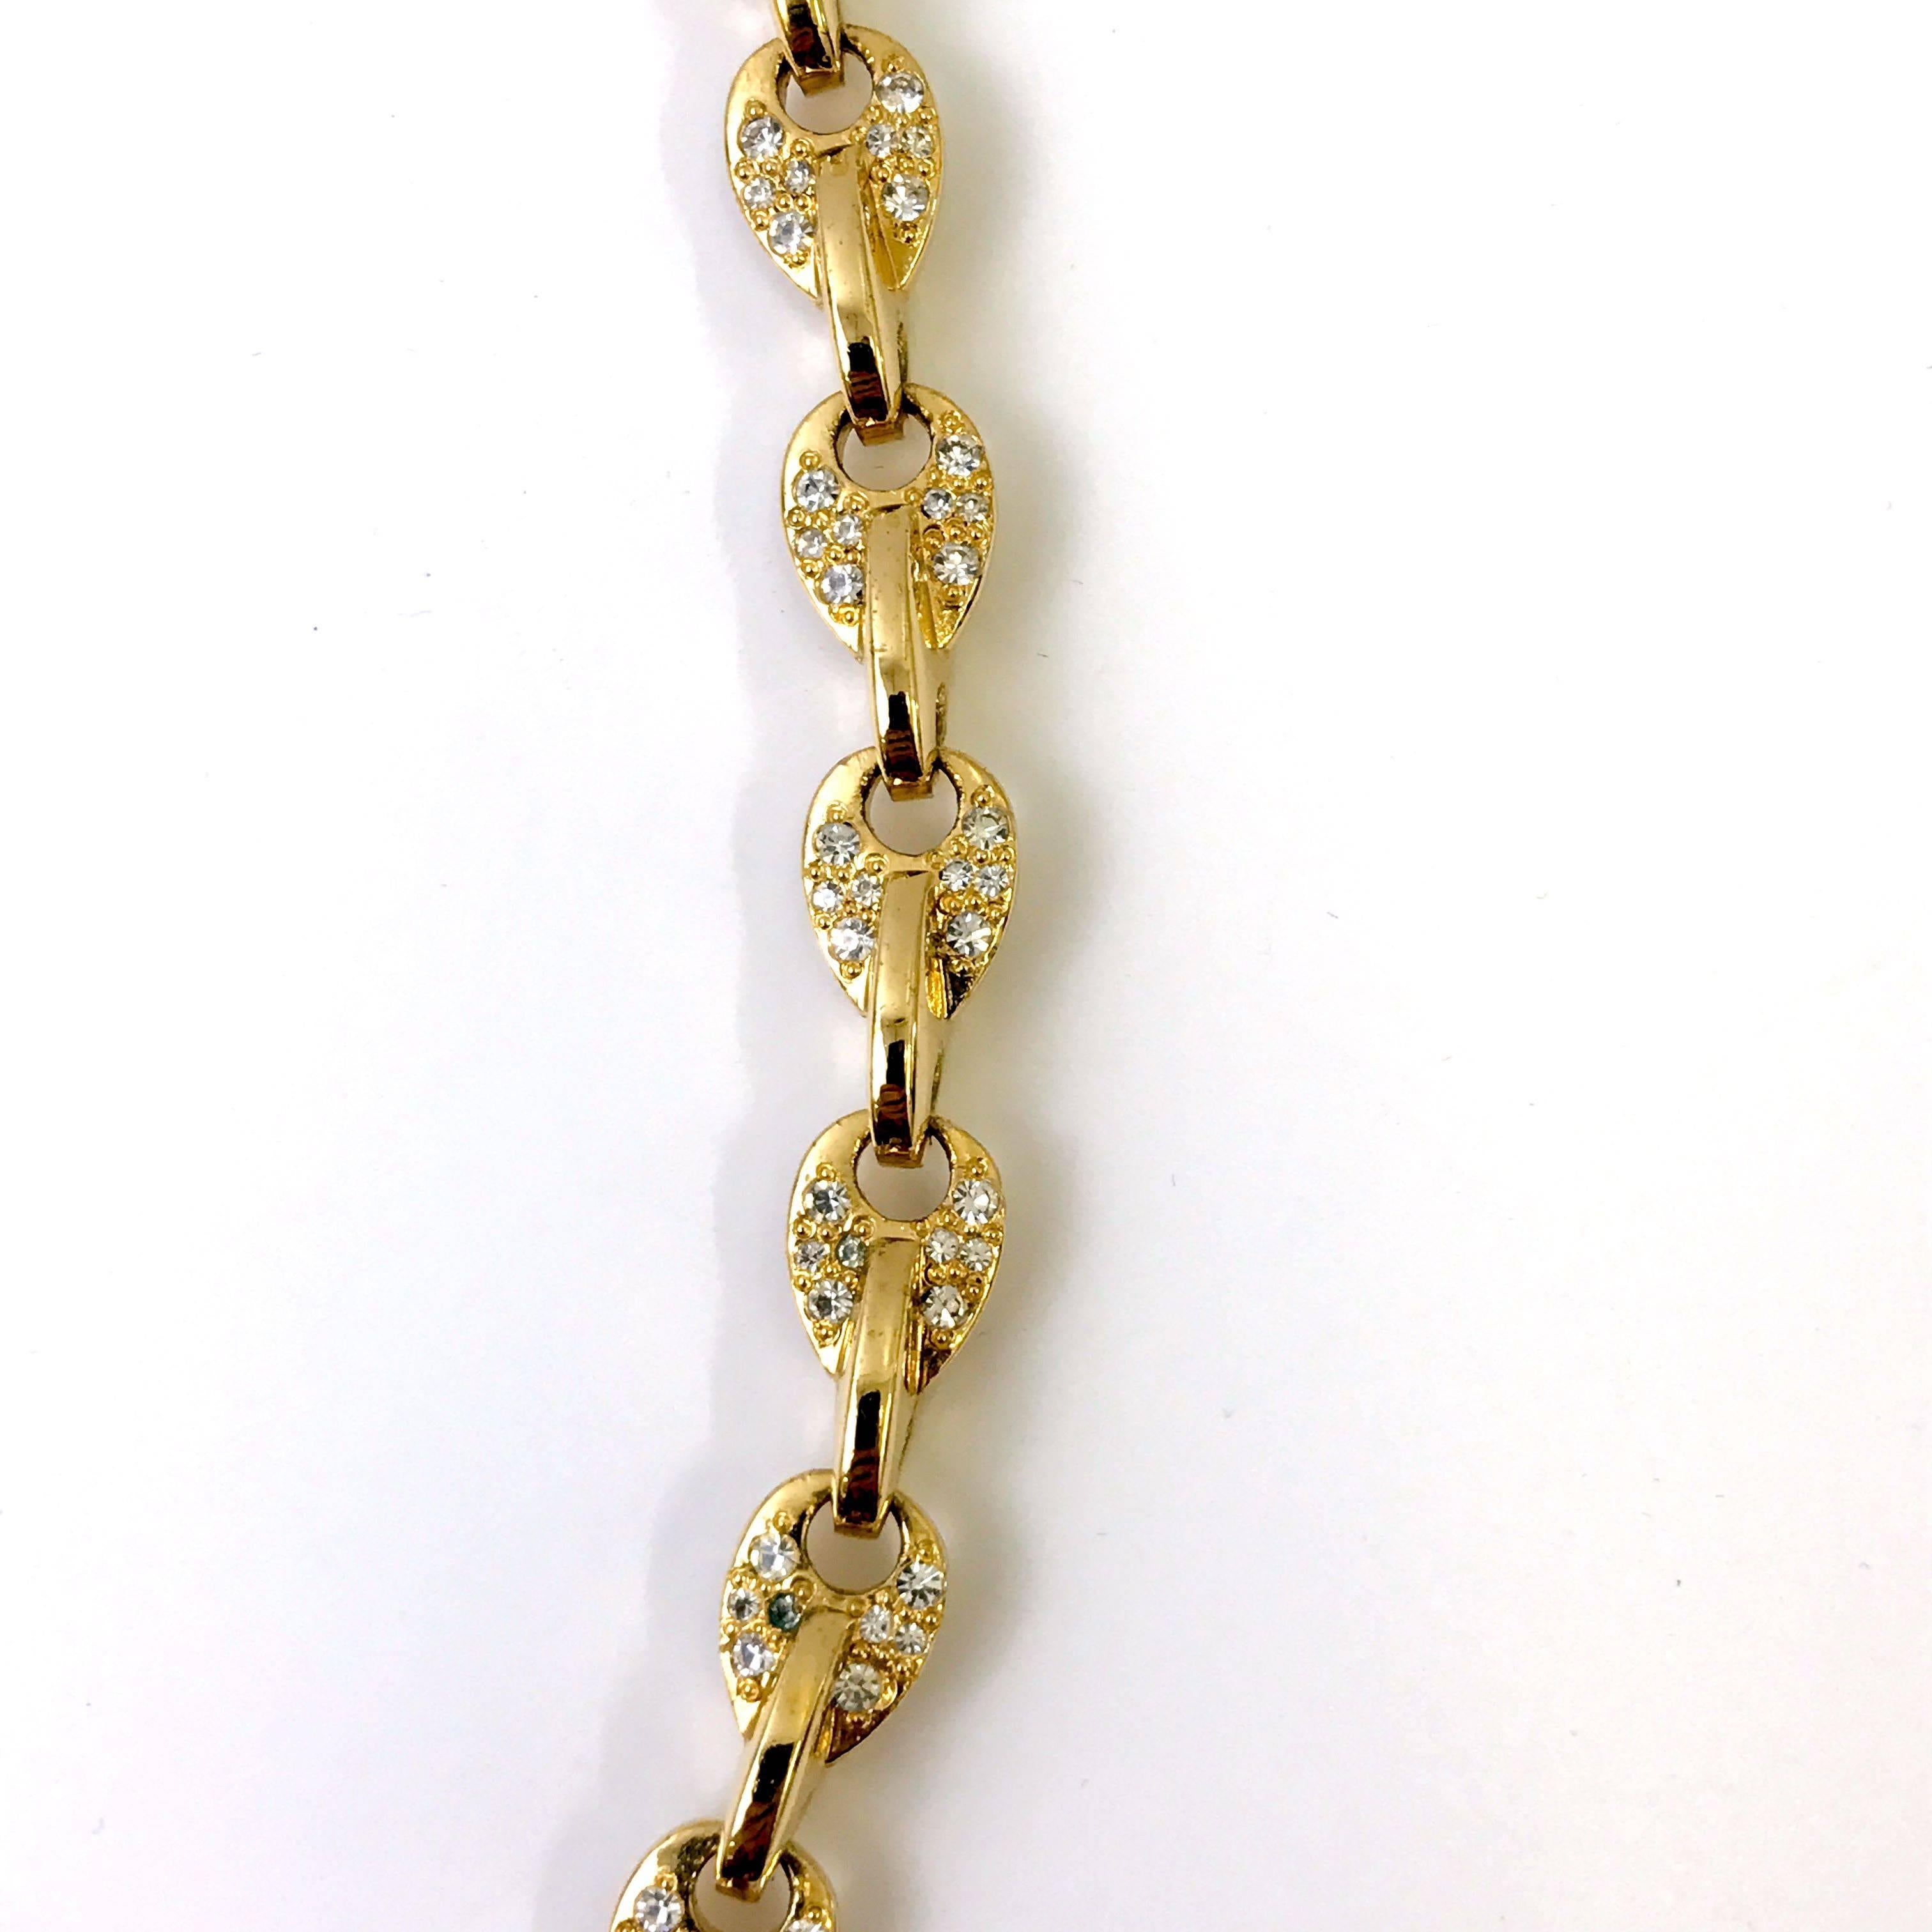 Gianni Versace gold double medusa head necklace with rhinestones, 1990s  For Sale 1